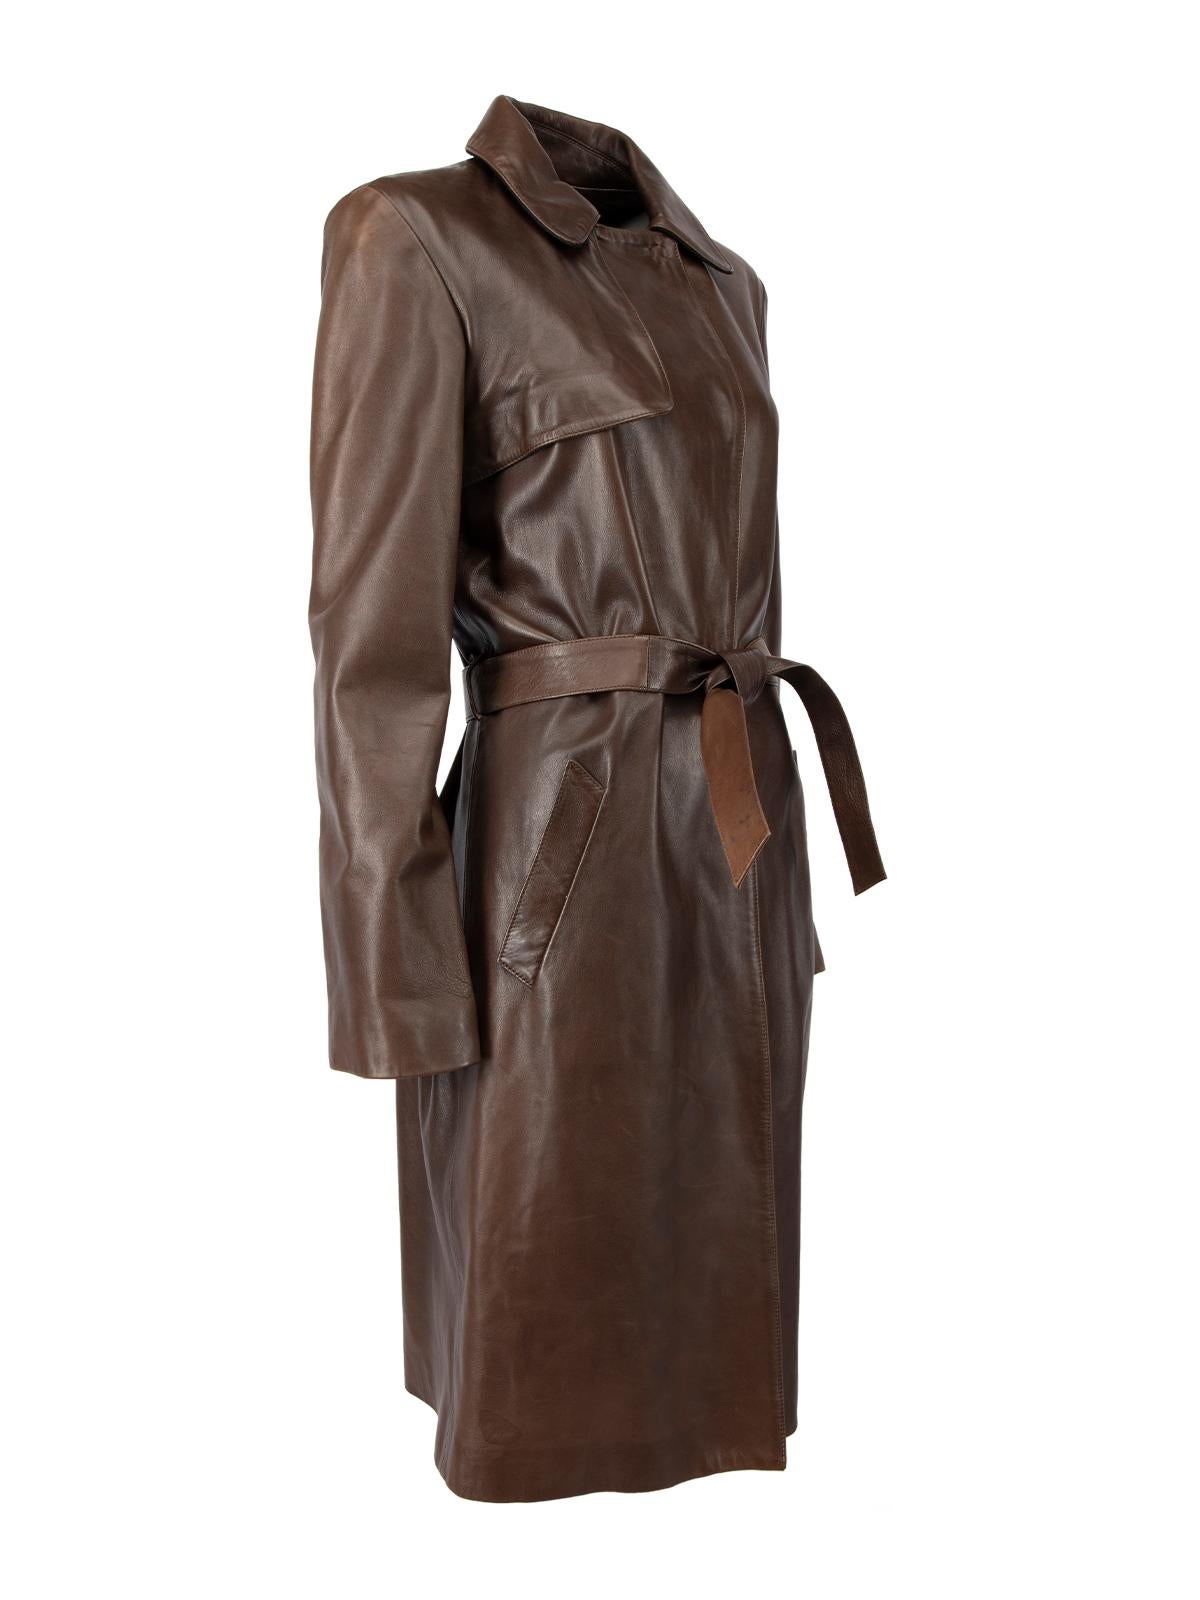 CONDITION is Very good. Minimal wear to coat is evident. Minimal wear to the leather exterior where light scuffs can be seen on this used Joseph designer resale item. Details Brown Leather Trench coat Long length Long sleeves Single breasted Snap